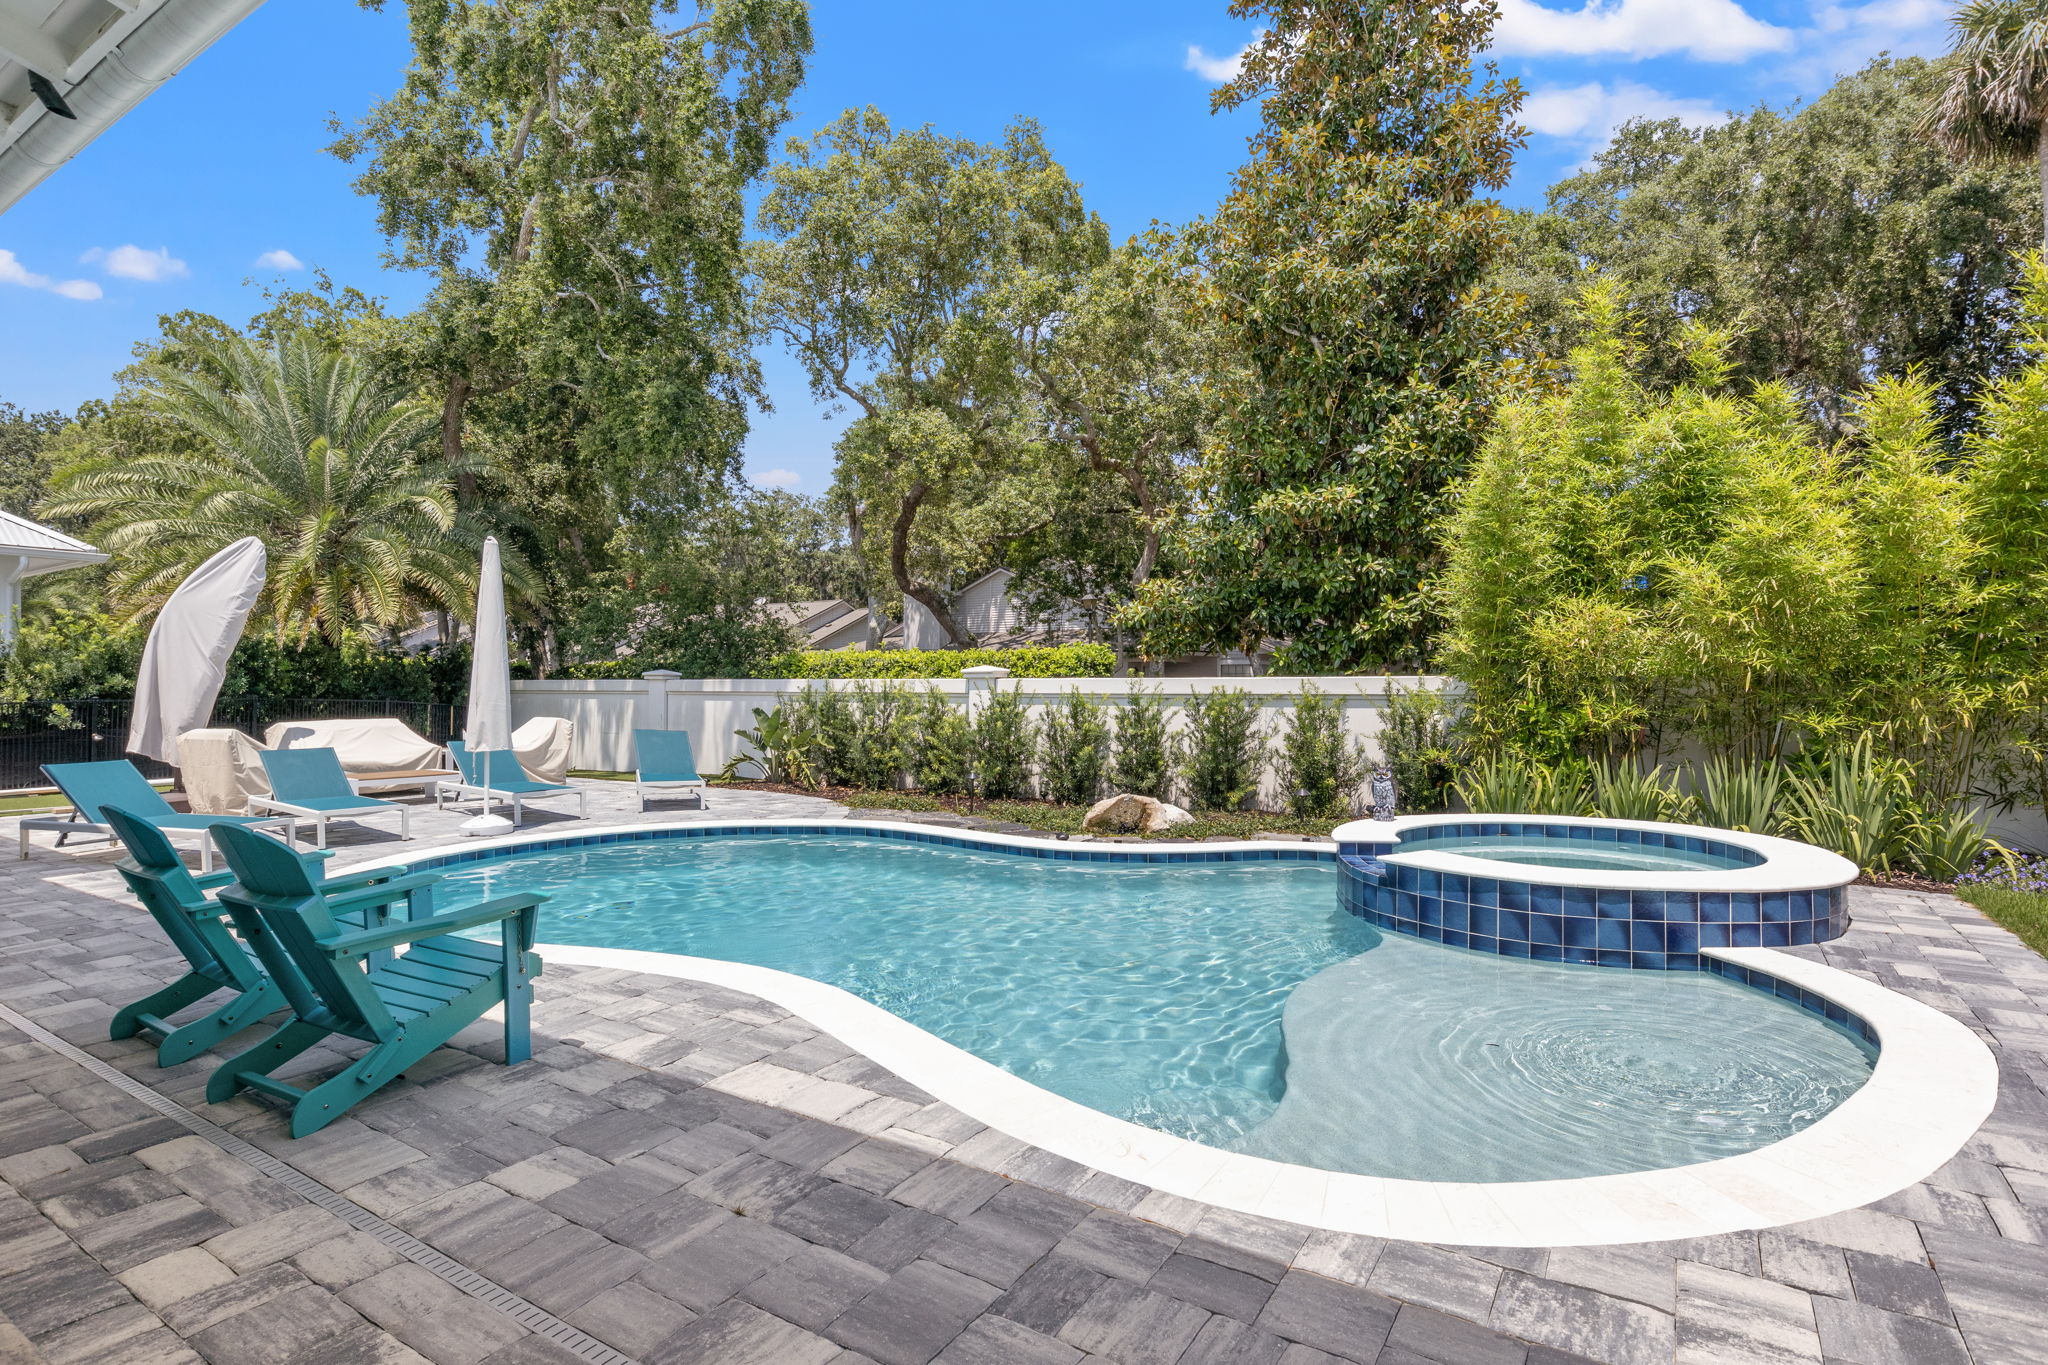 Featured image for “Which Shapes of Pools Make the Most Use of the Space In Your Backyard?”